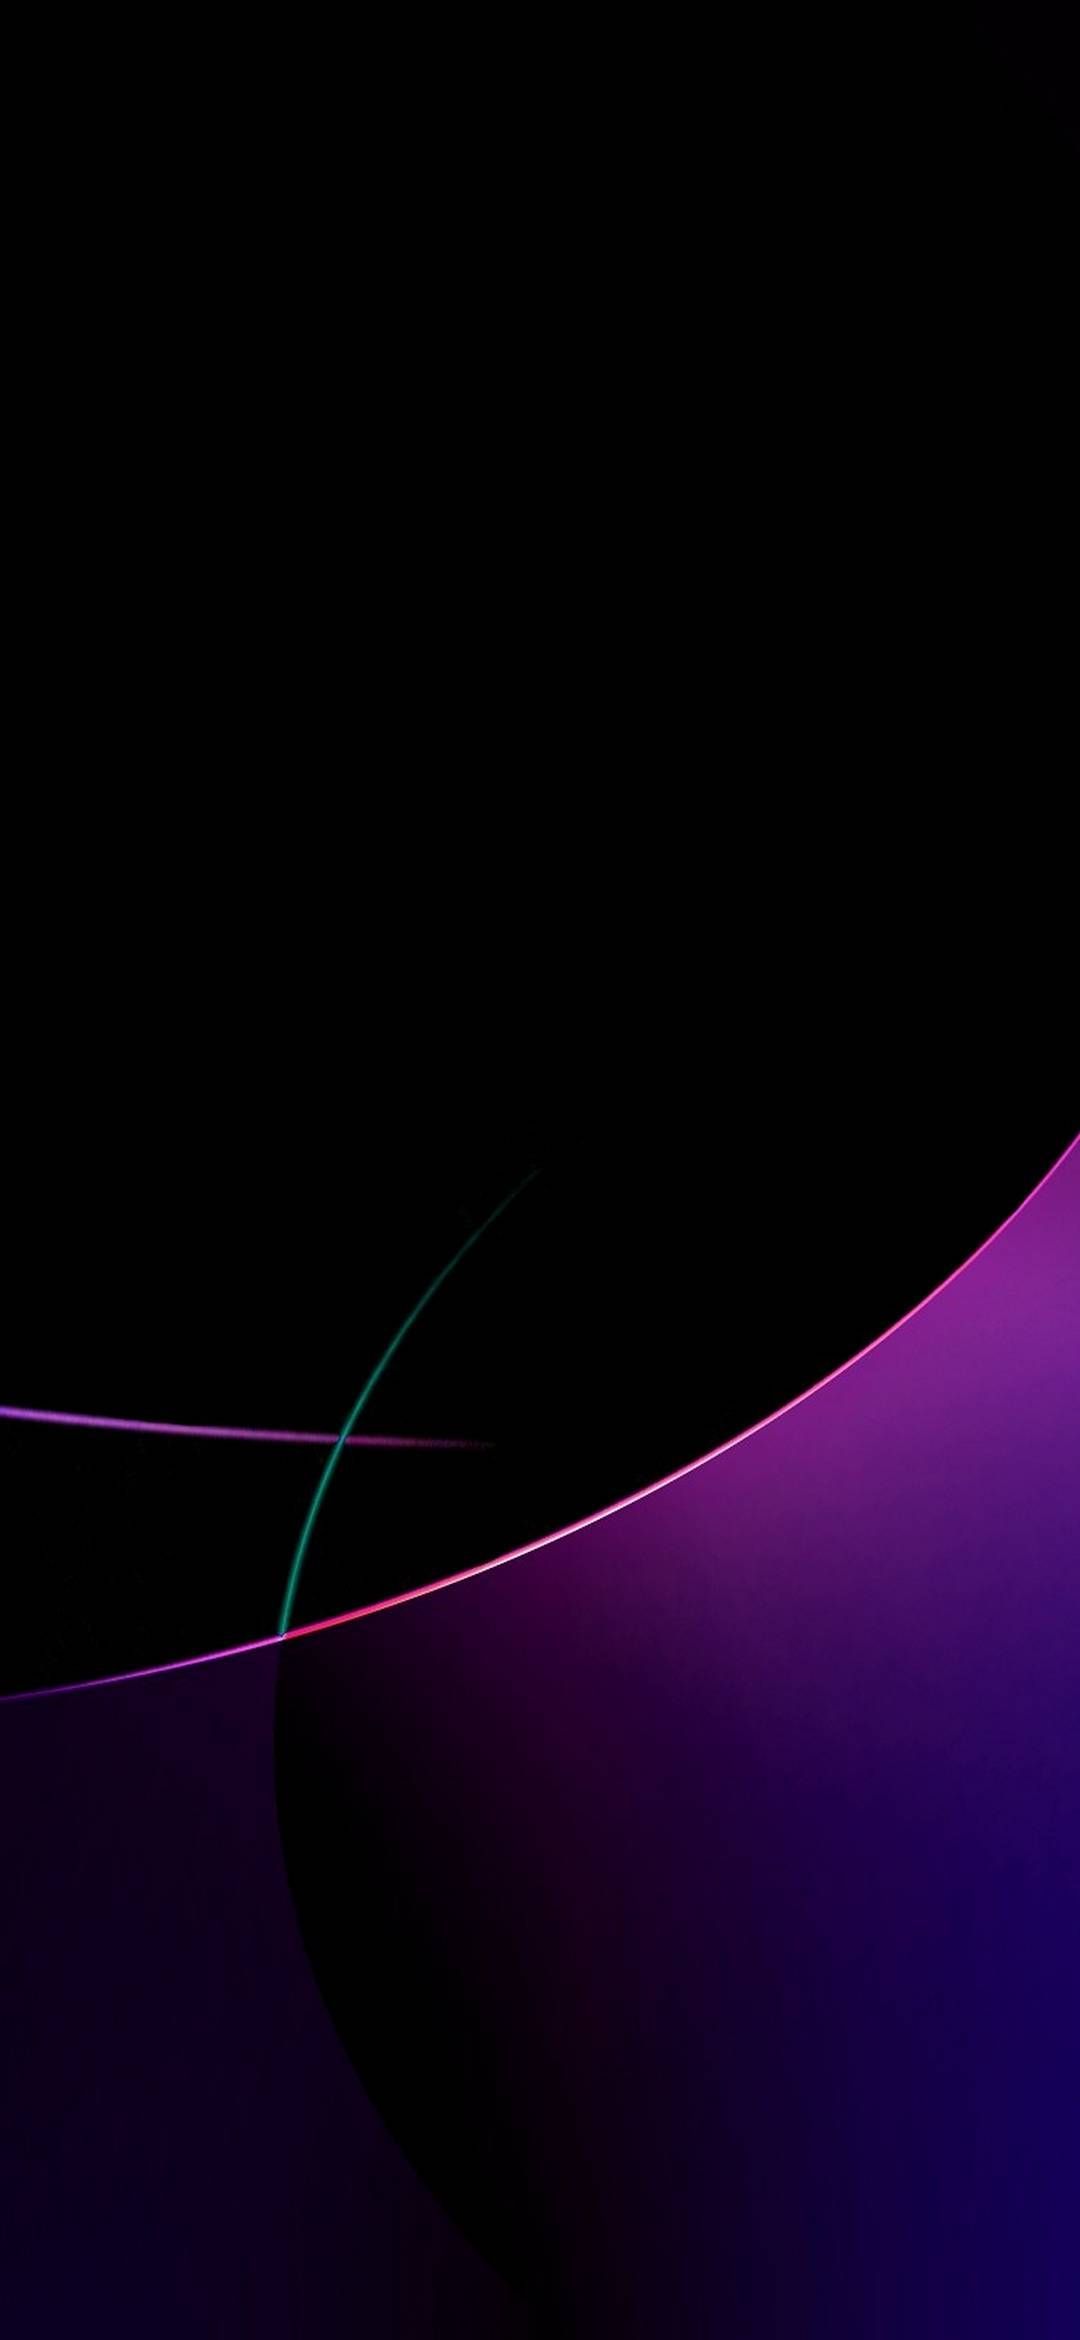 ✓[100+] Oval White Dark - [1080x2340]. #CellWallpaper in 2019 - Android /  iPhone HD Wallpaper Background Download (png / jpg) (2023)